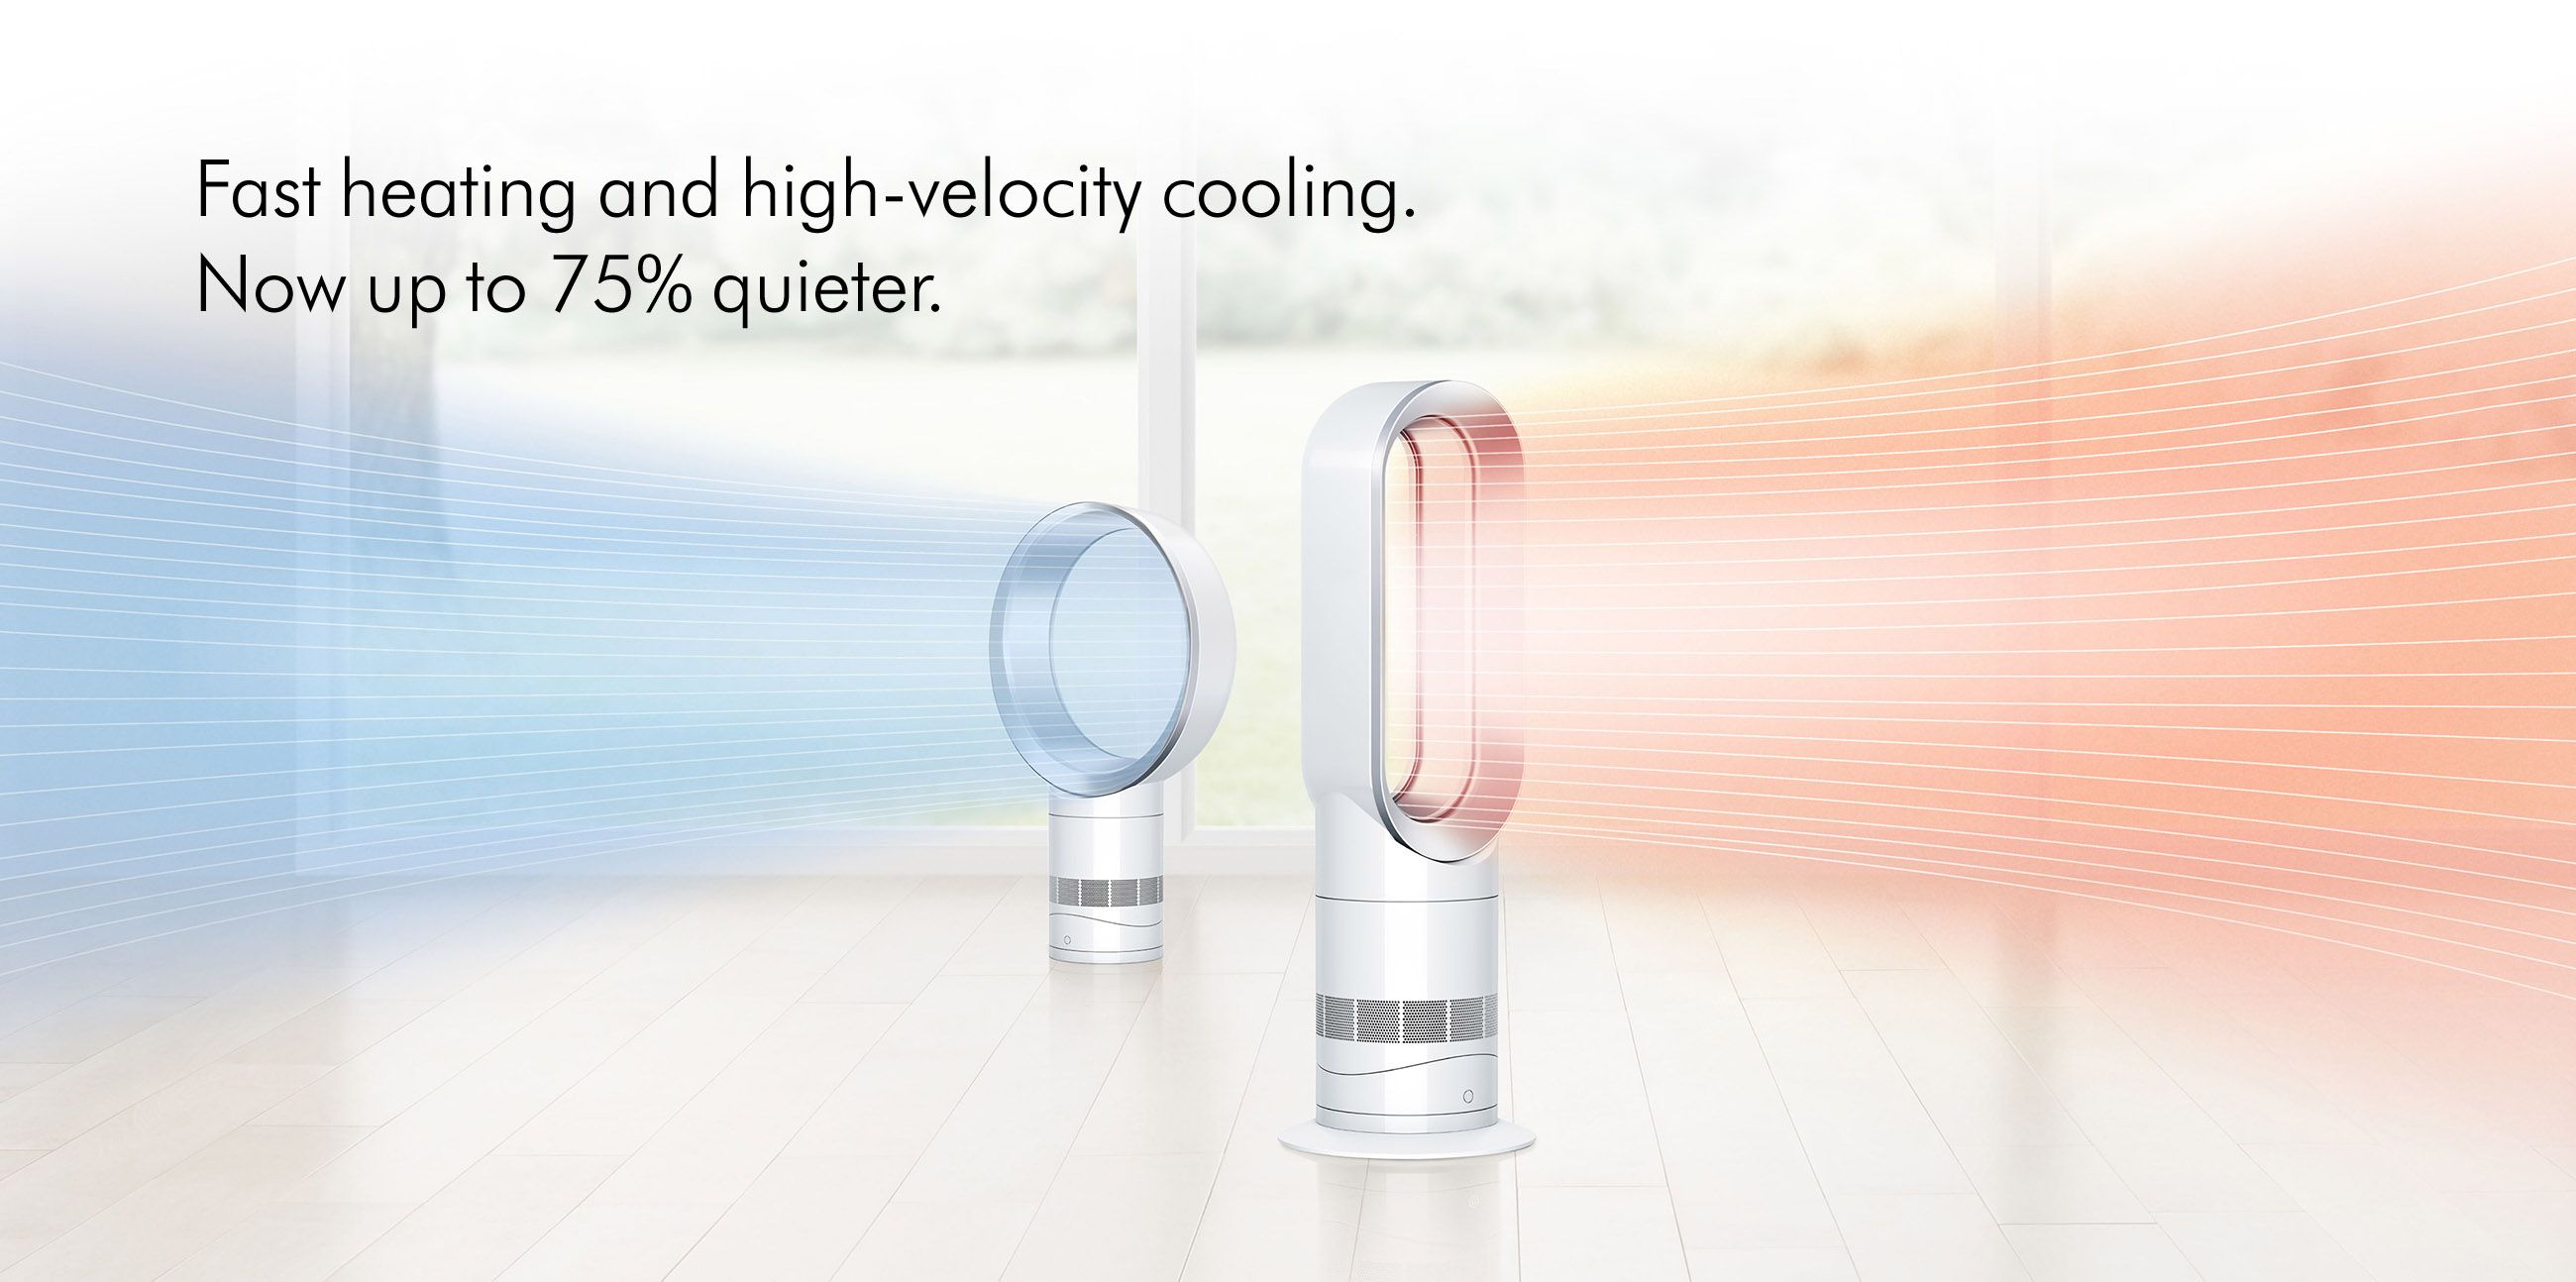 Dyson fans and heaters